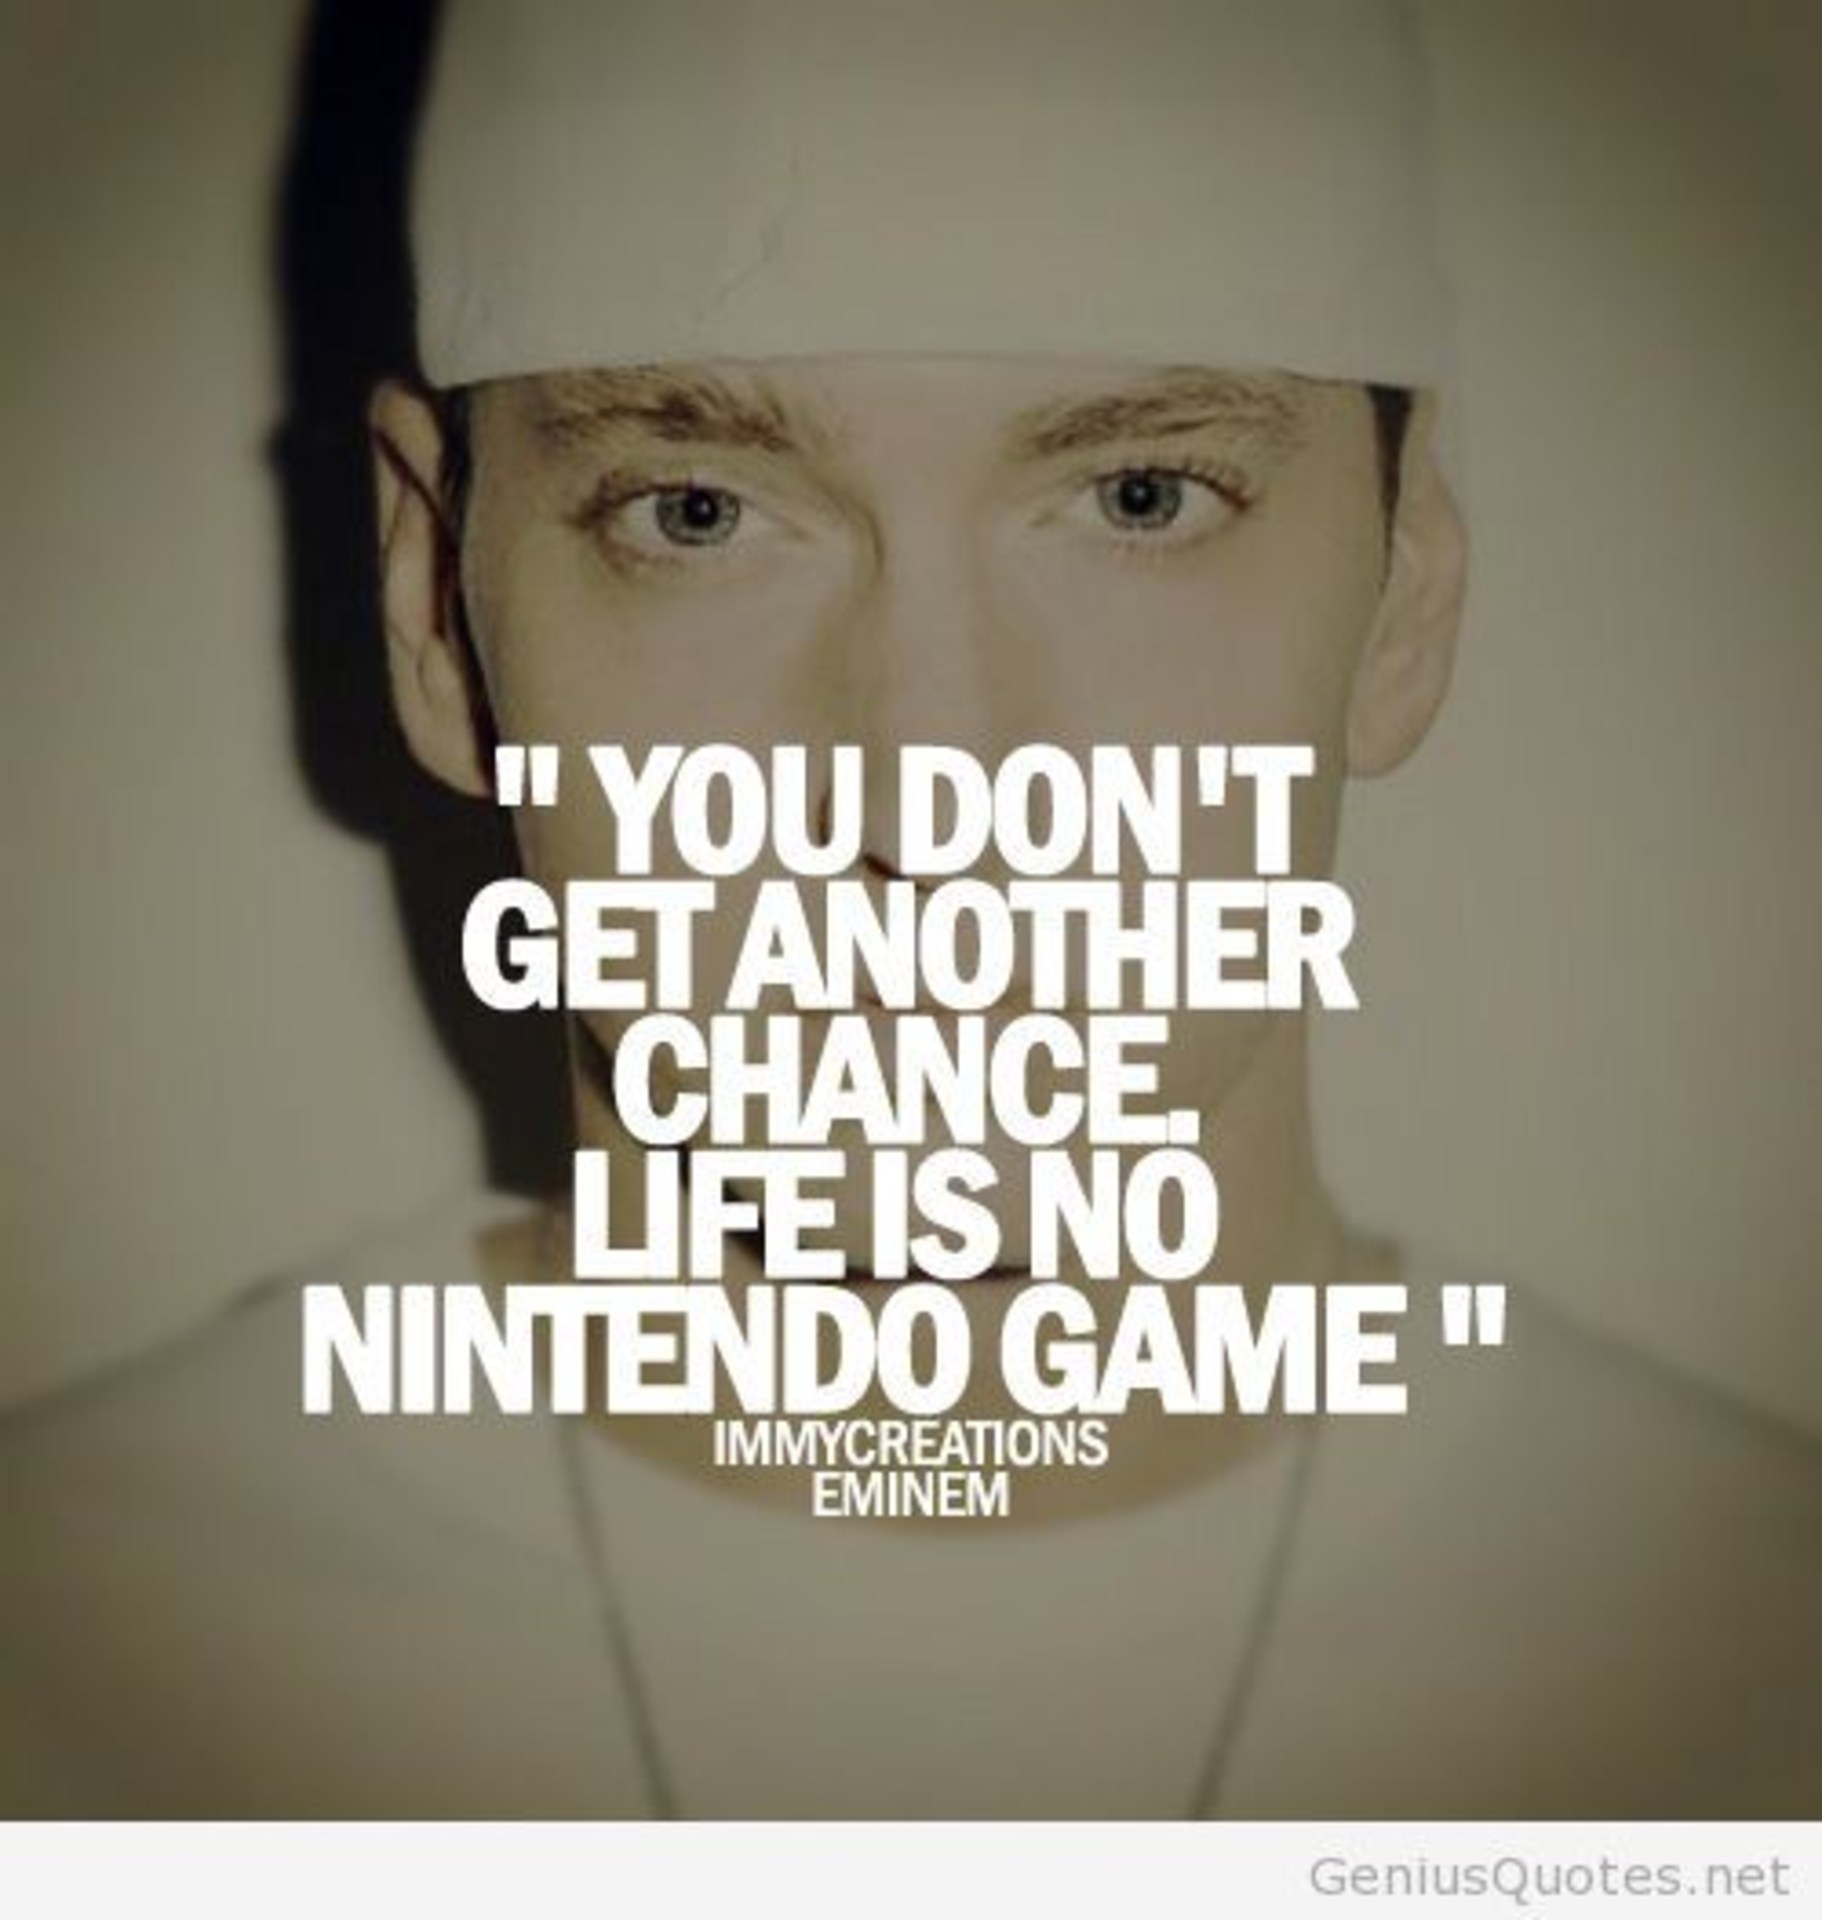 Android Mobiles Full Hd Resolutions 1080 X - Sayings From Eminem , HD Wallpaper & Backgrounds